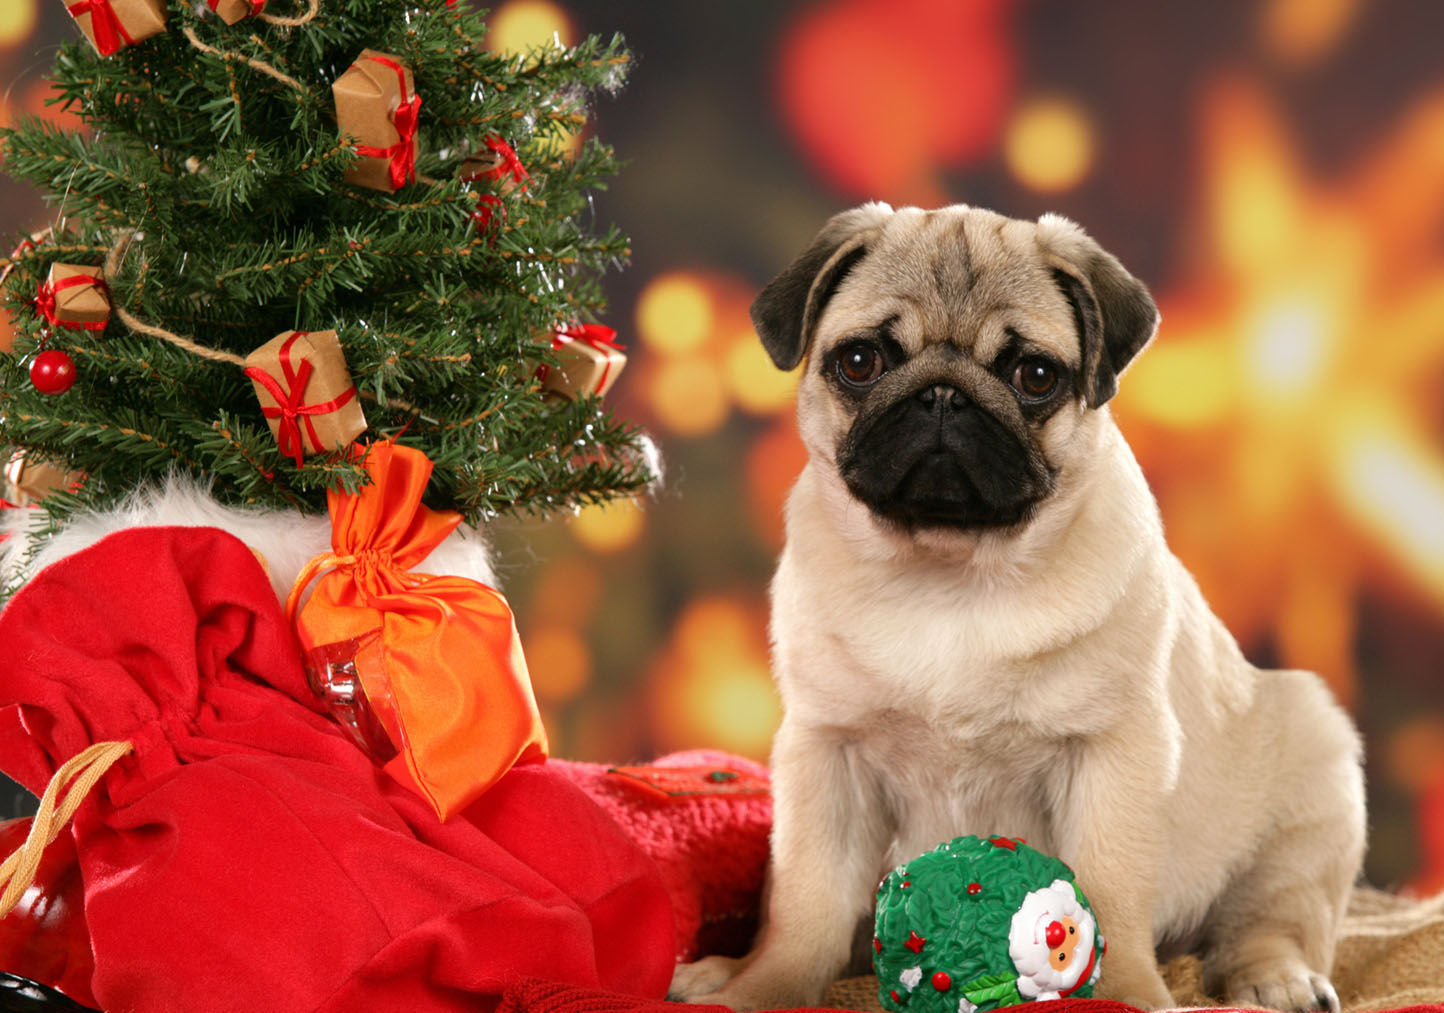 Free download Christmas Pug Wallpaper The Dog Wallpaper Best The